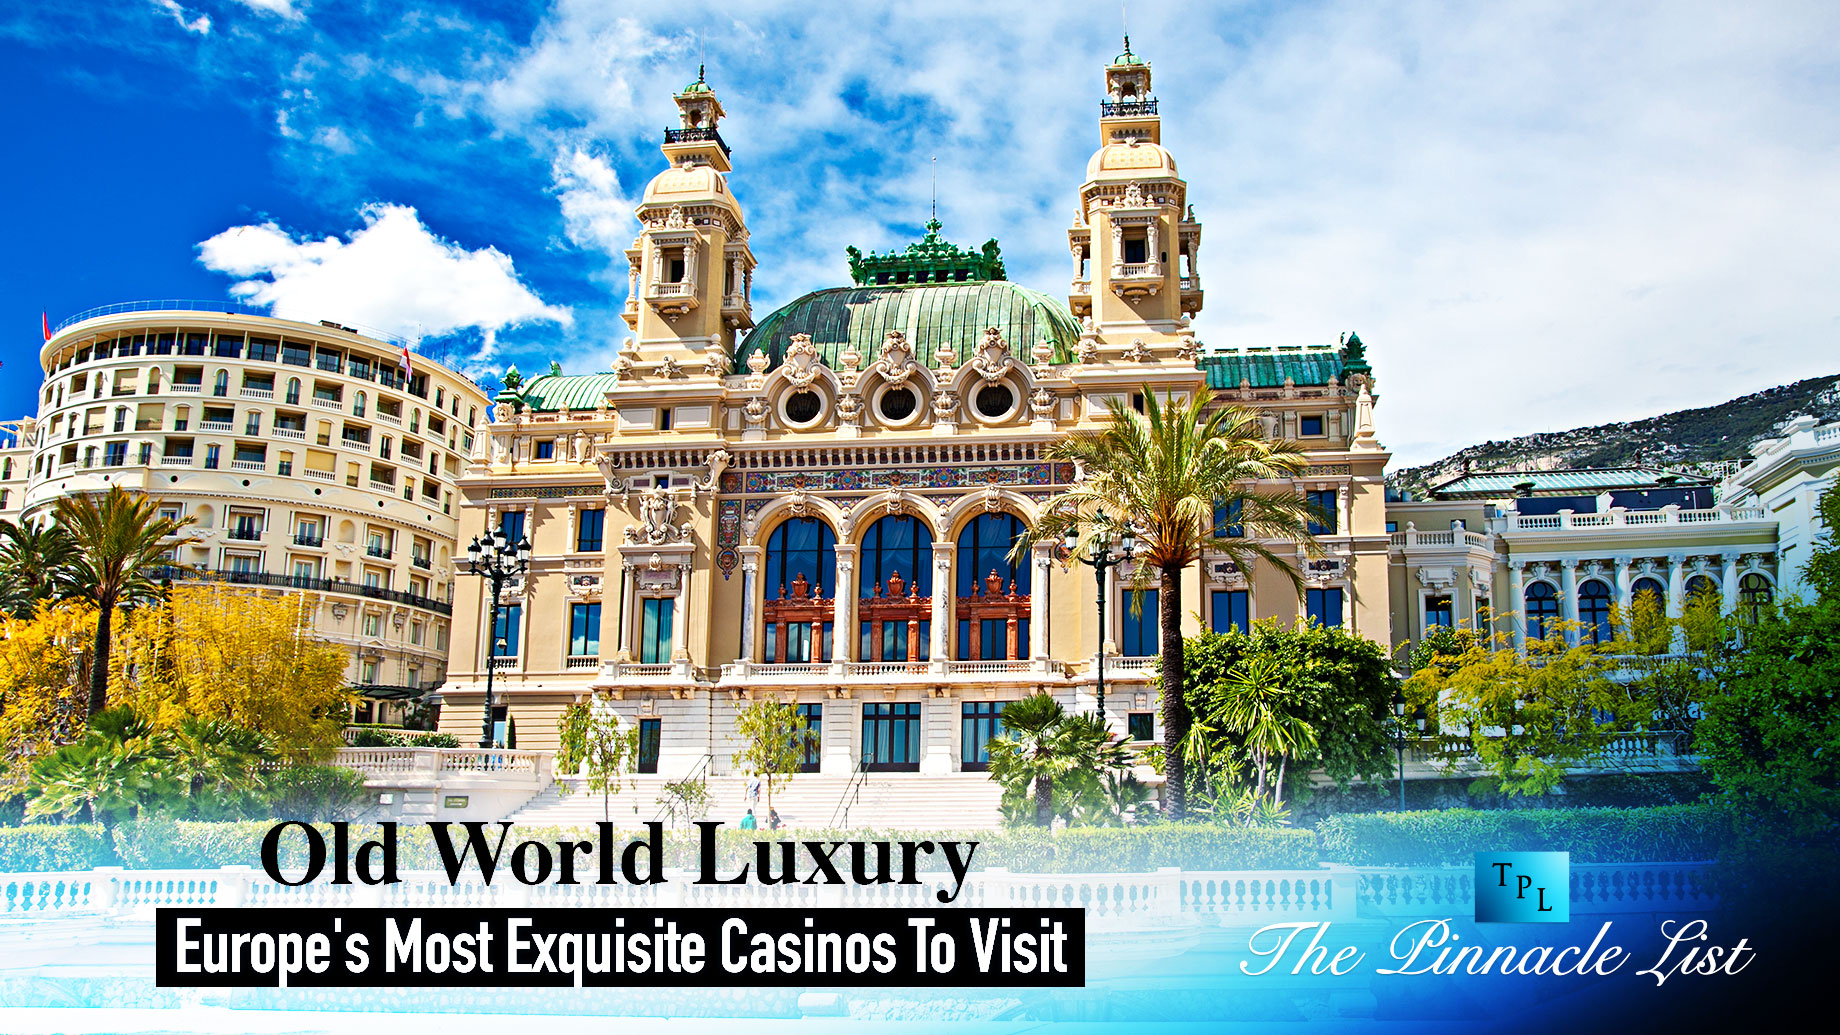 Old World Luxury: Europe's Most Exquisite Casinos To Visit